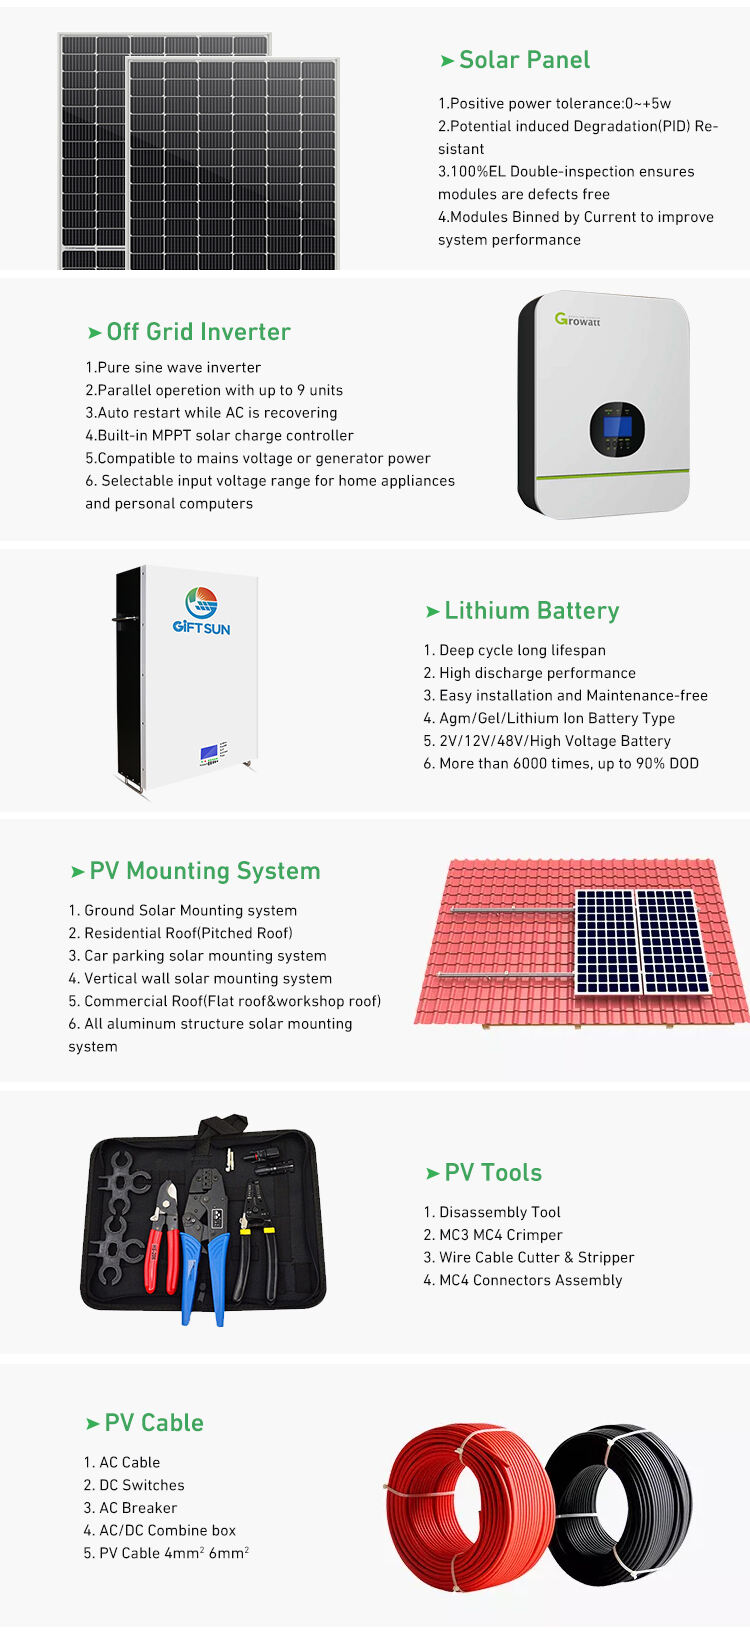 Off-grid Solar PV System Lithium battery manufacture